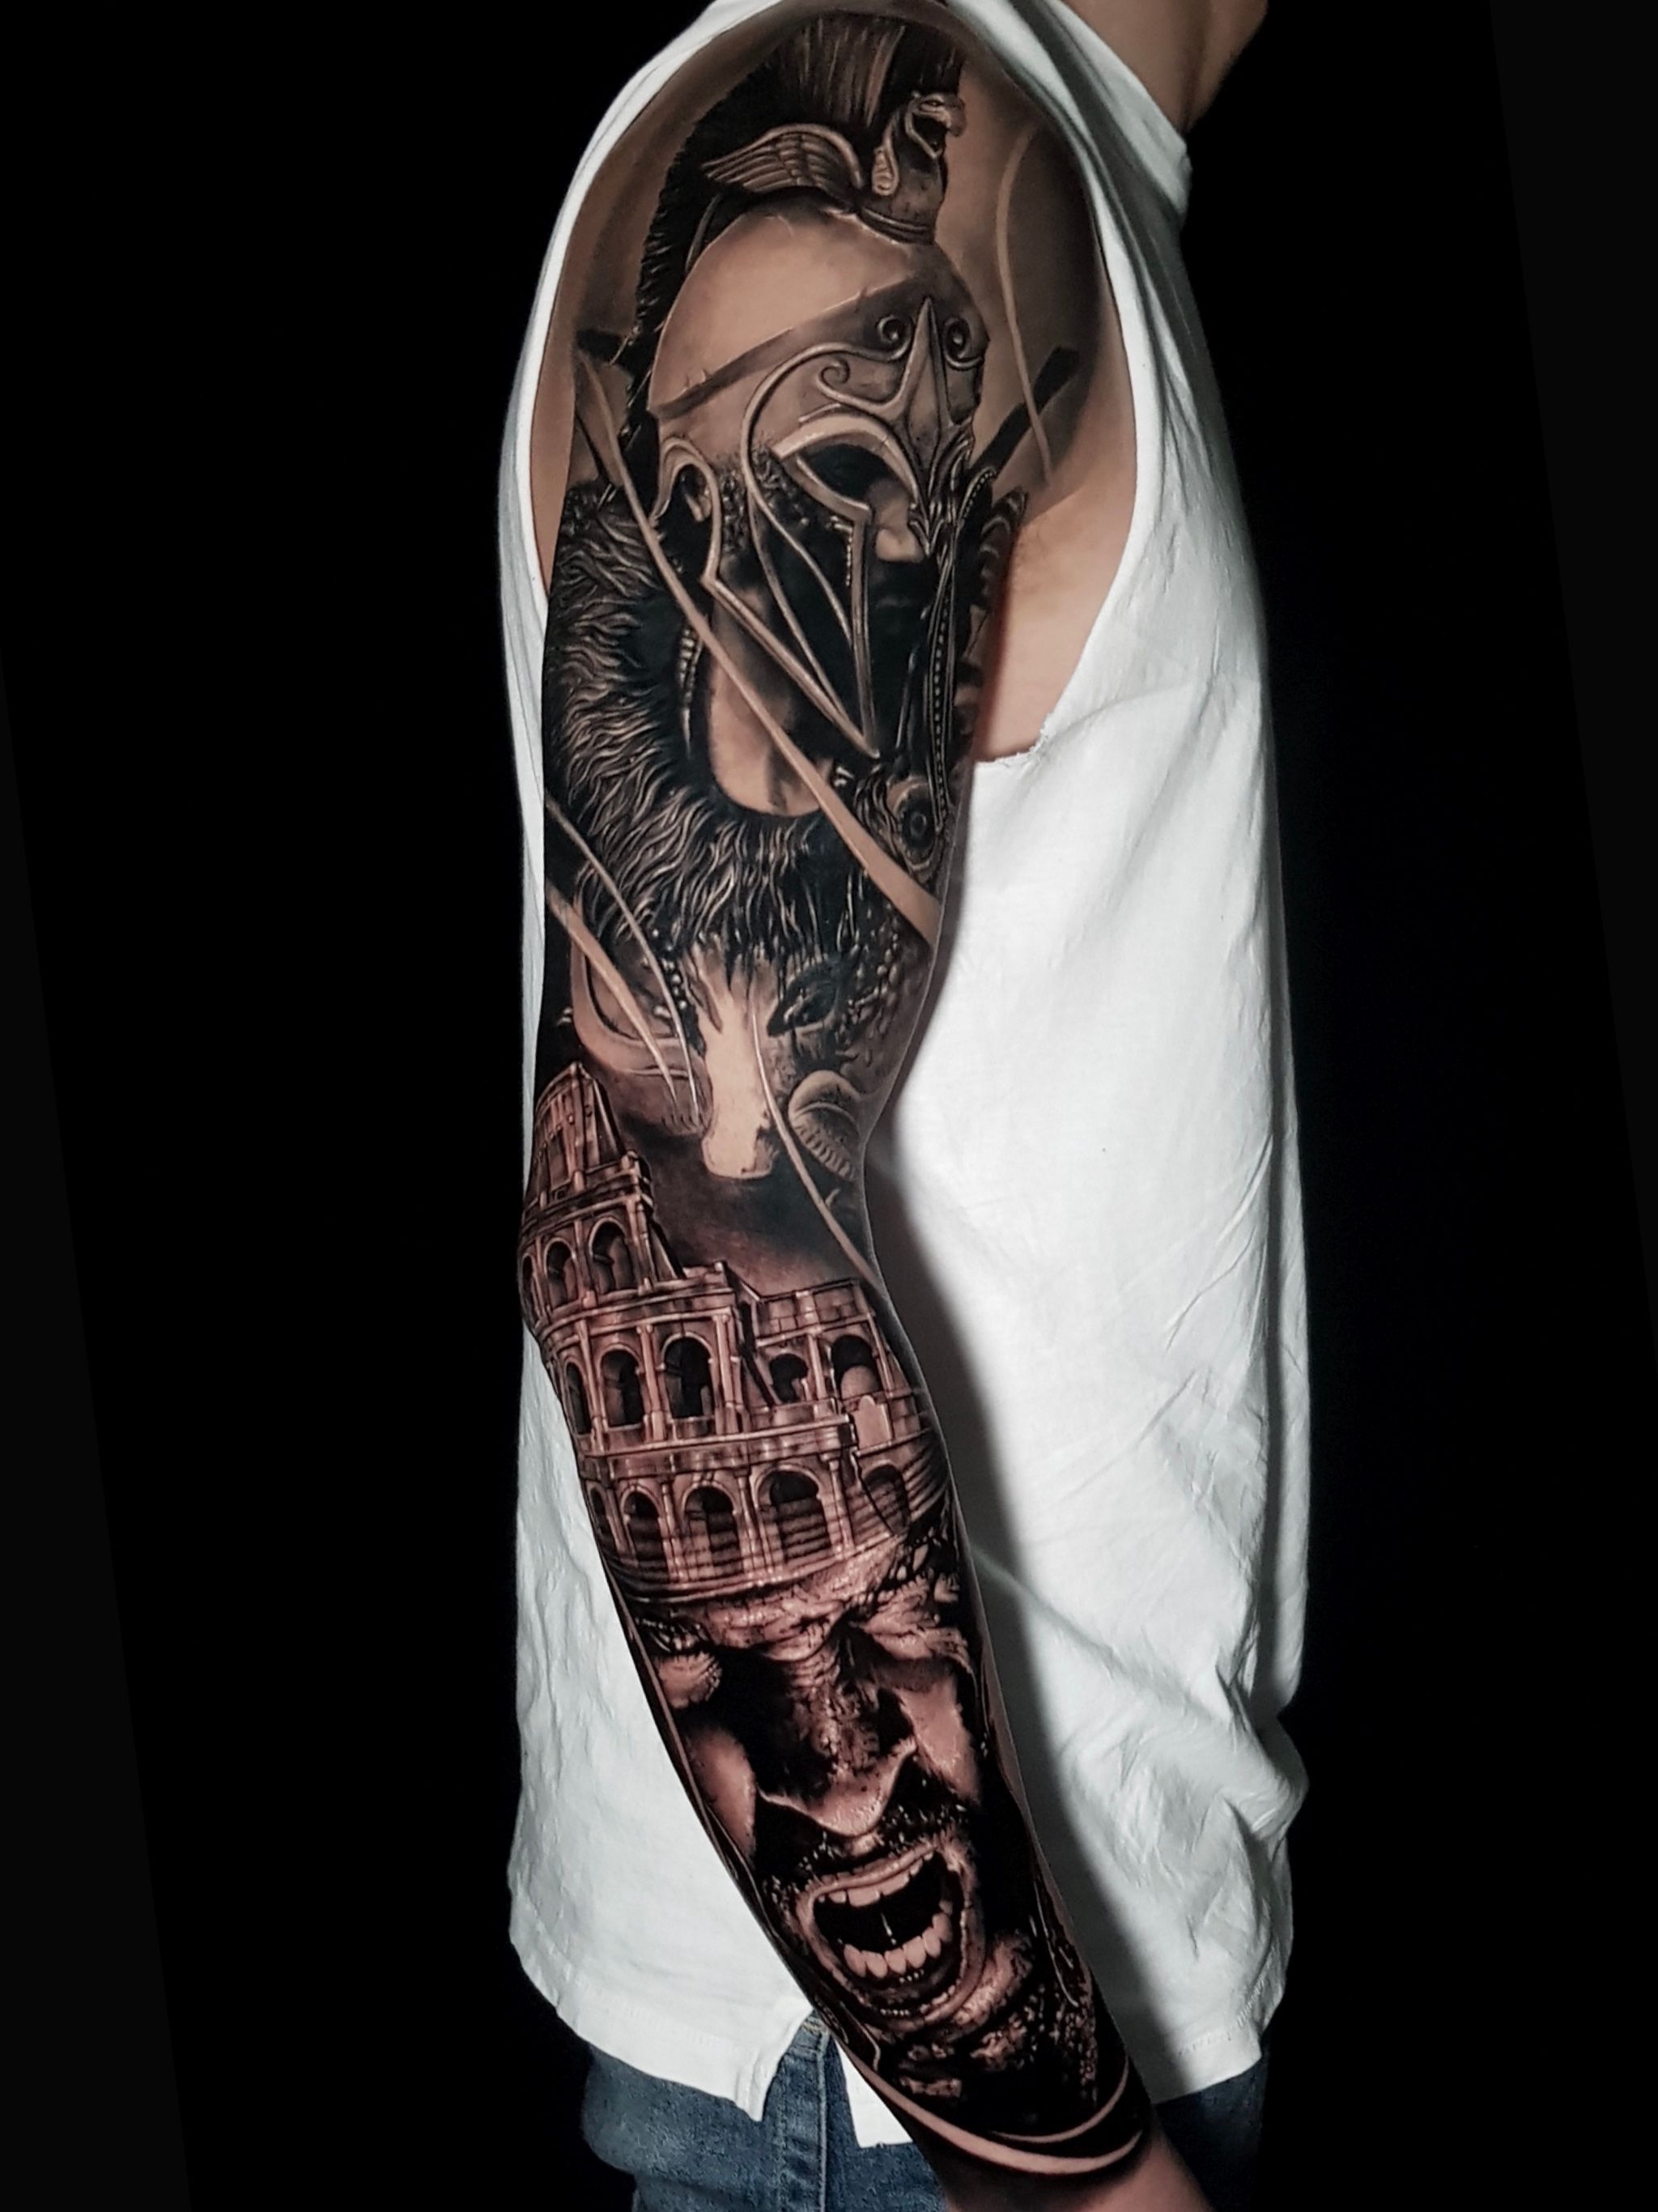 Roman neumeral tricep men august 17 | Back of arm tattoo, Tricep tattoos,  Forearm band tattoos